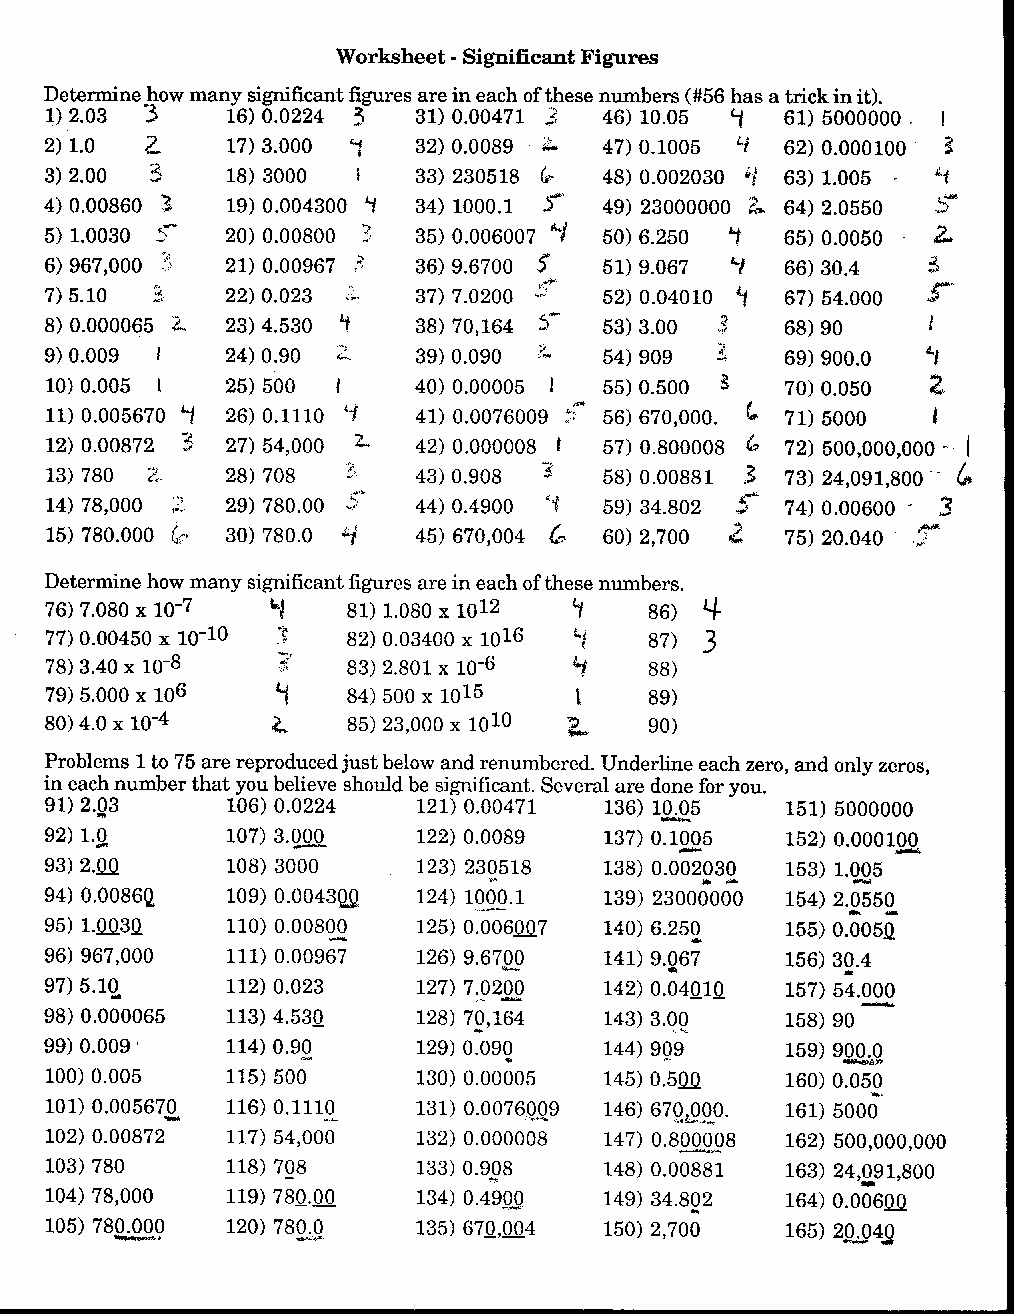 Sig Figs Worksheet with Answers Luxury Sig Fig Ws Answers